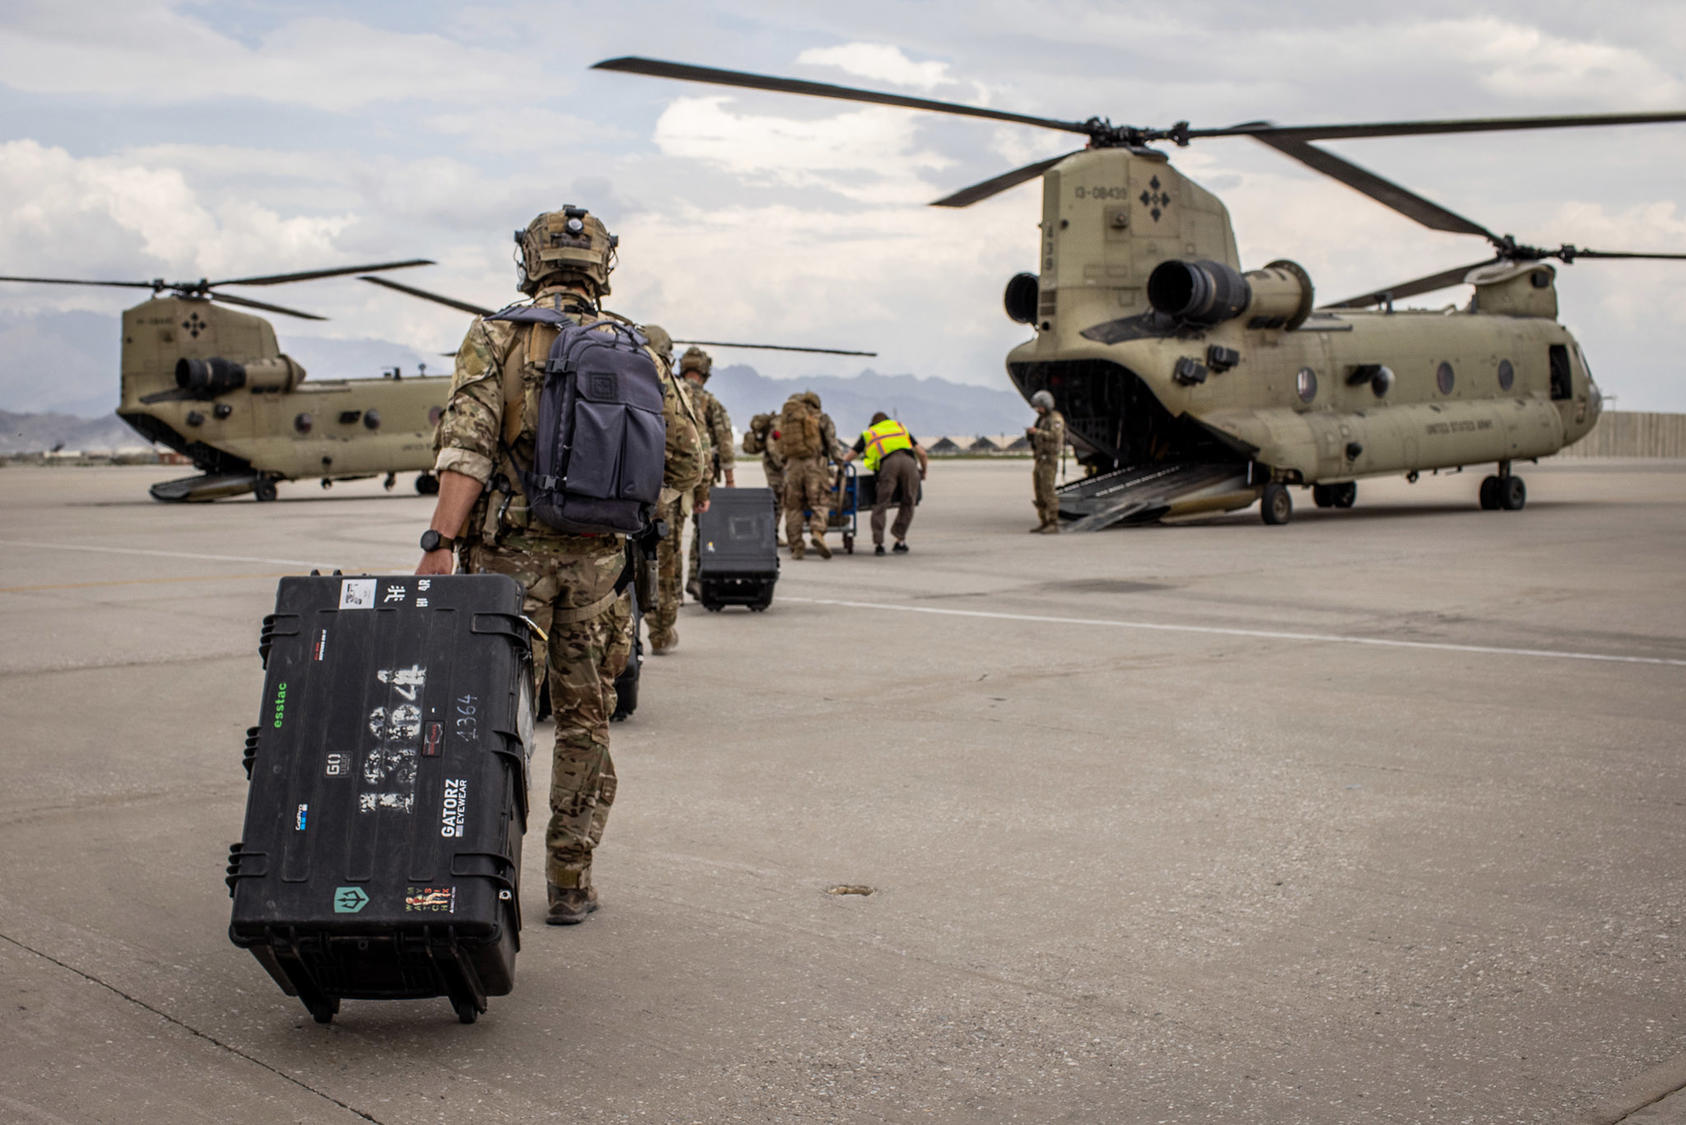 American and Polish soldiers board helicopters at an airfield in Bagram, Afghanistan. May 2, 2021. (Jim Huylebroek/The New York Times)